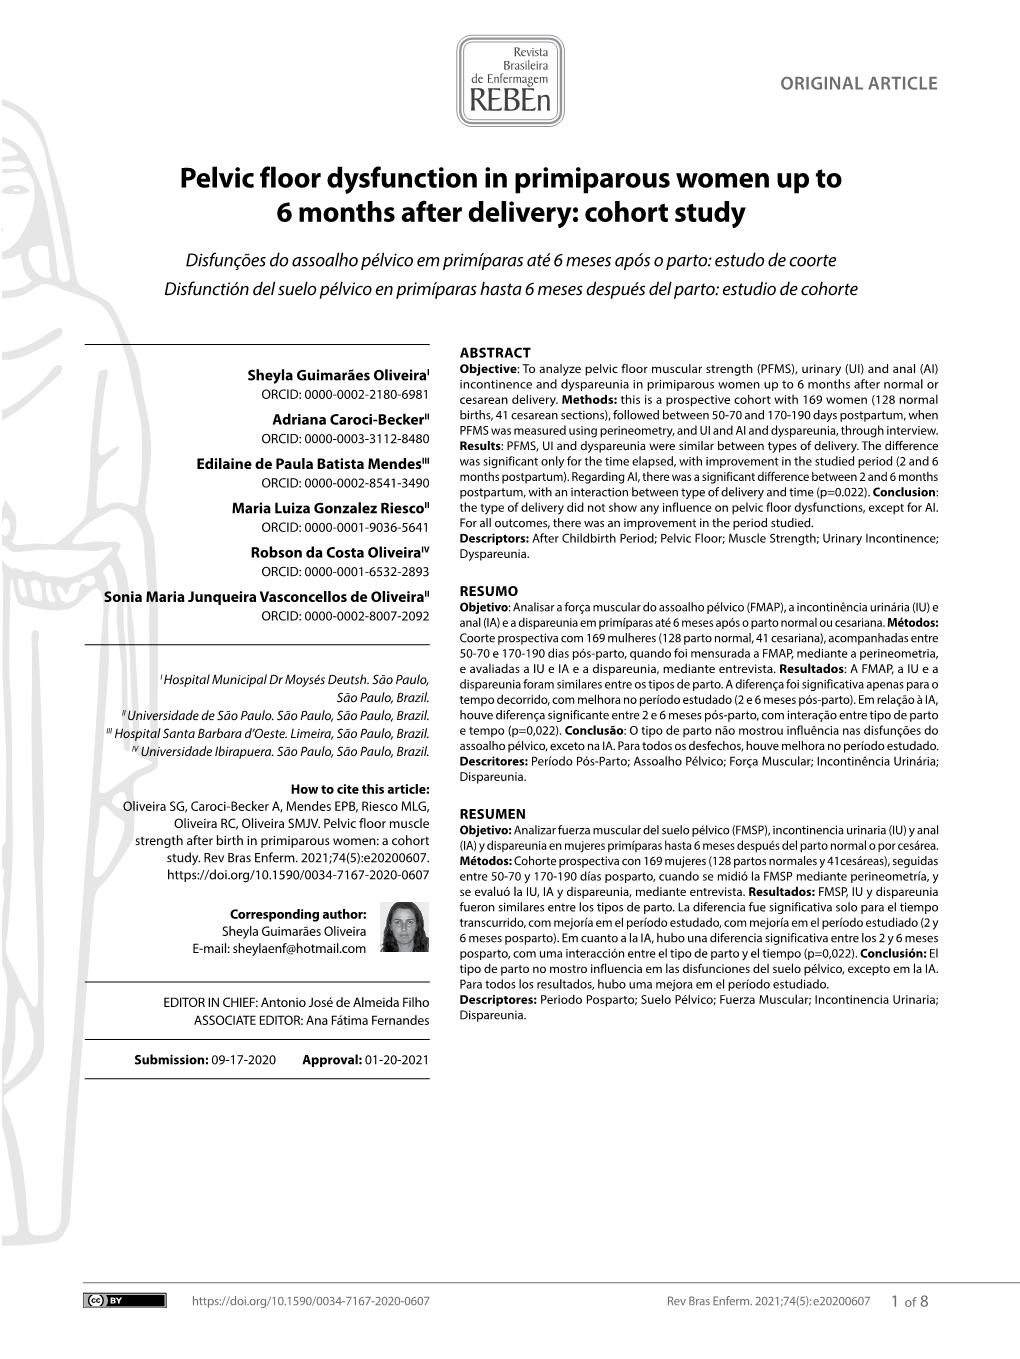 Pelvic Floor Dysfunction in Primiparous Women up to 6 Months After Delivery: Cohort Study